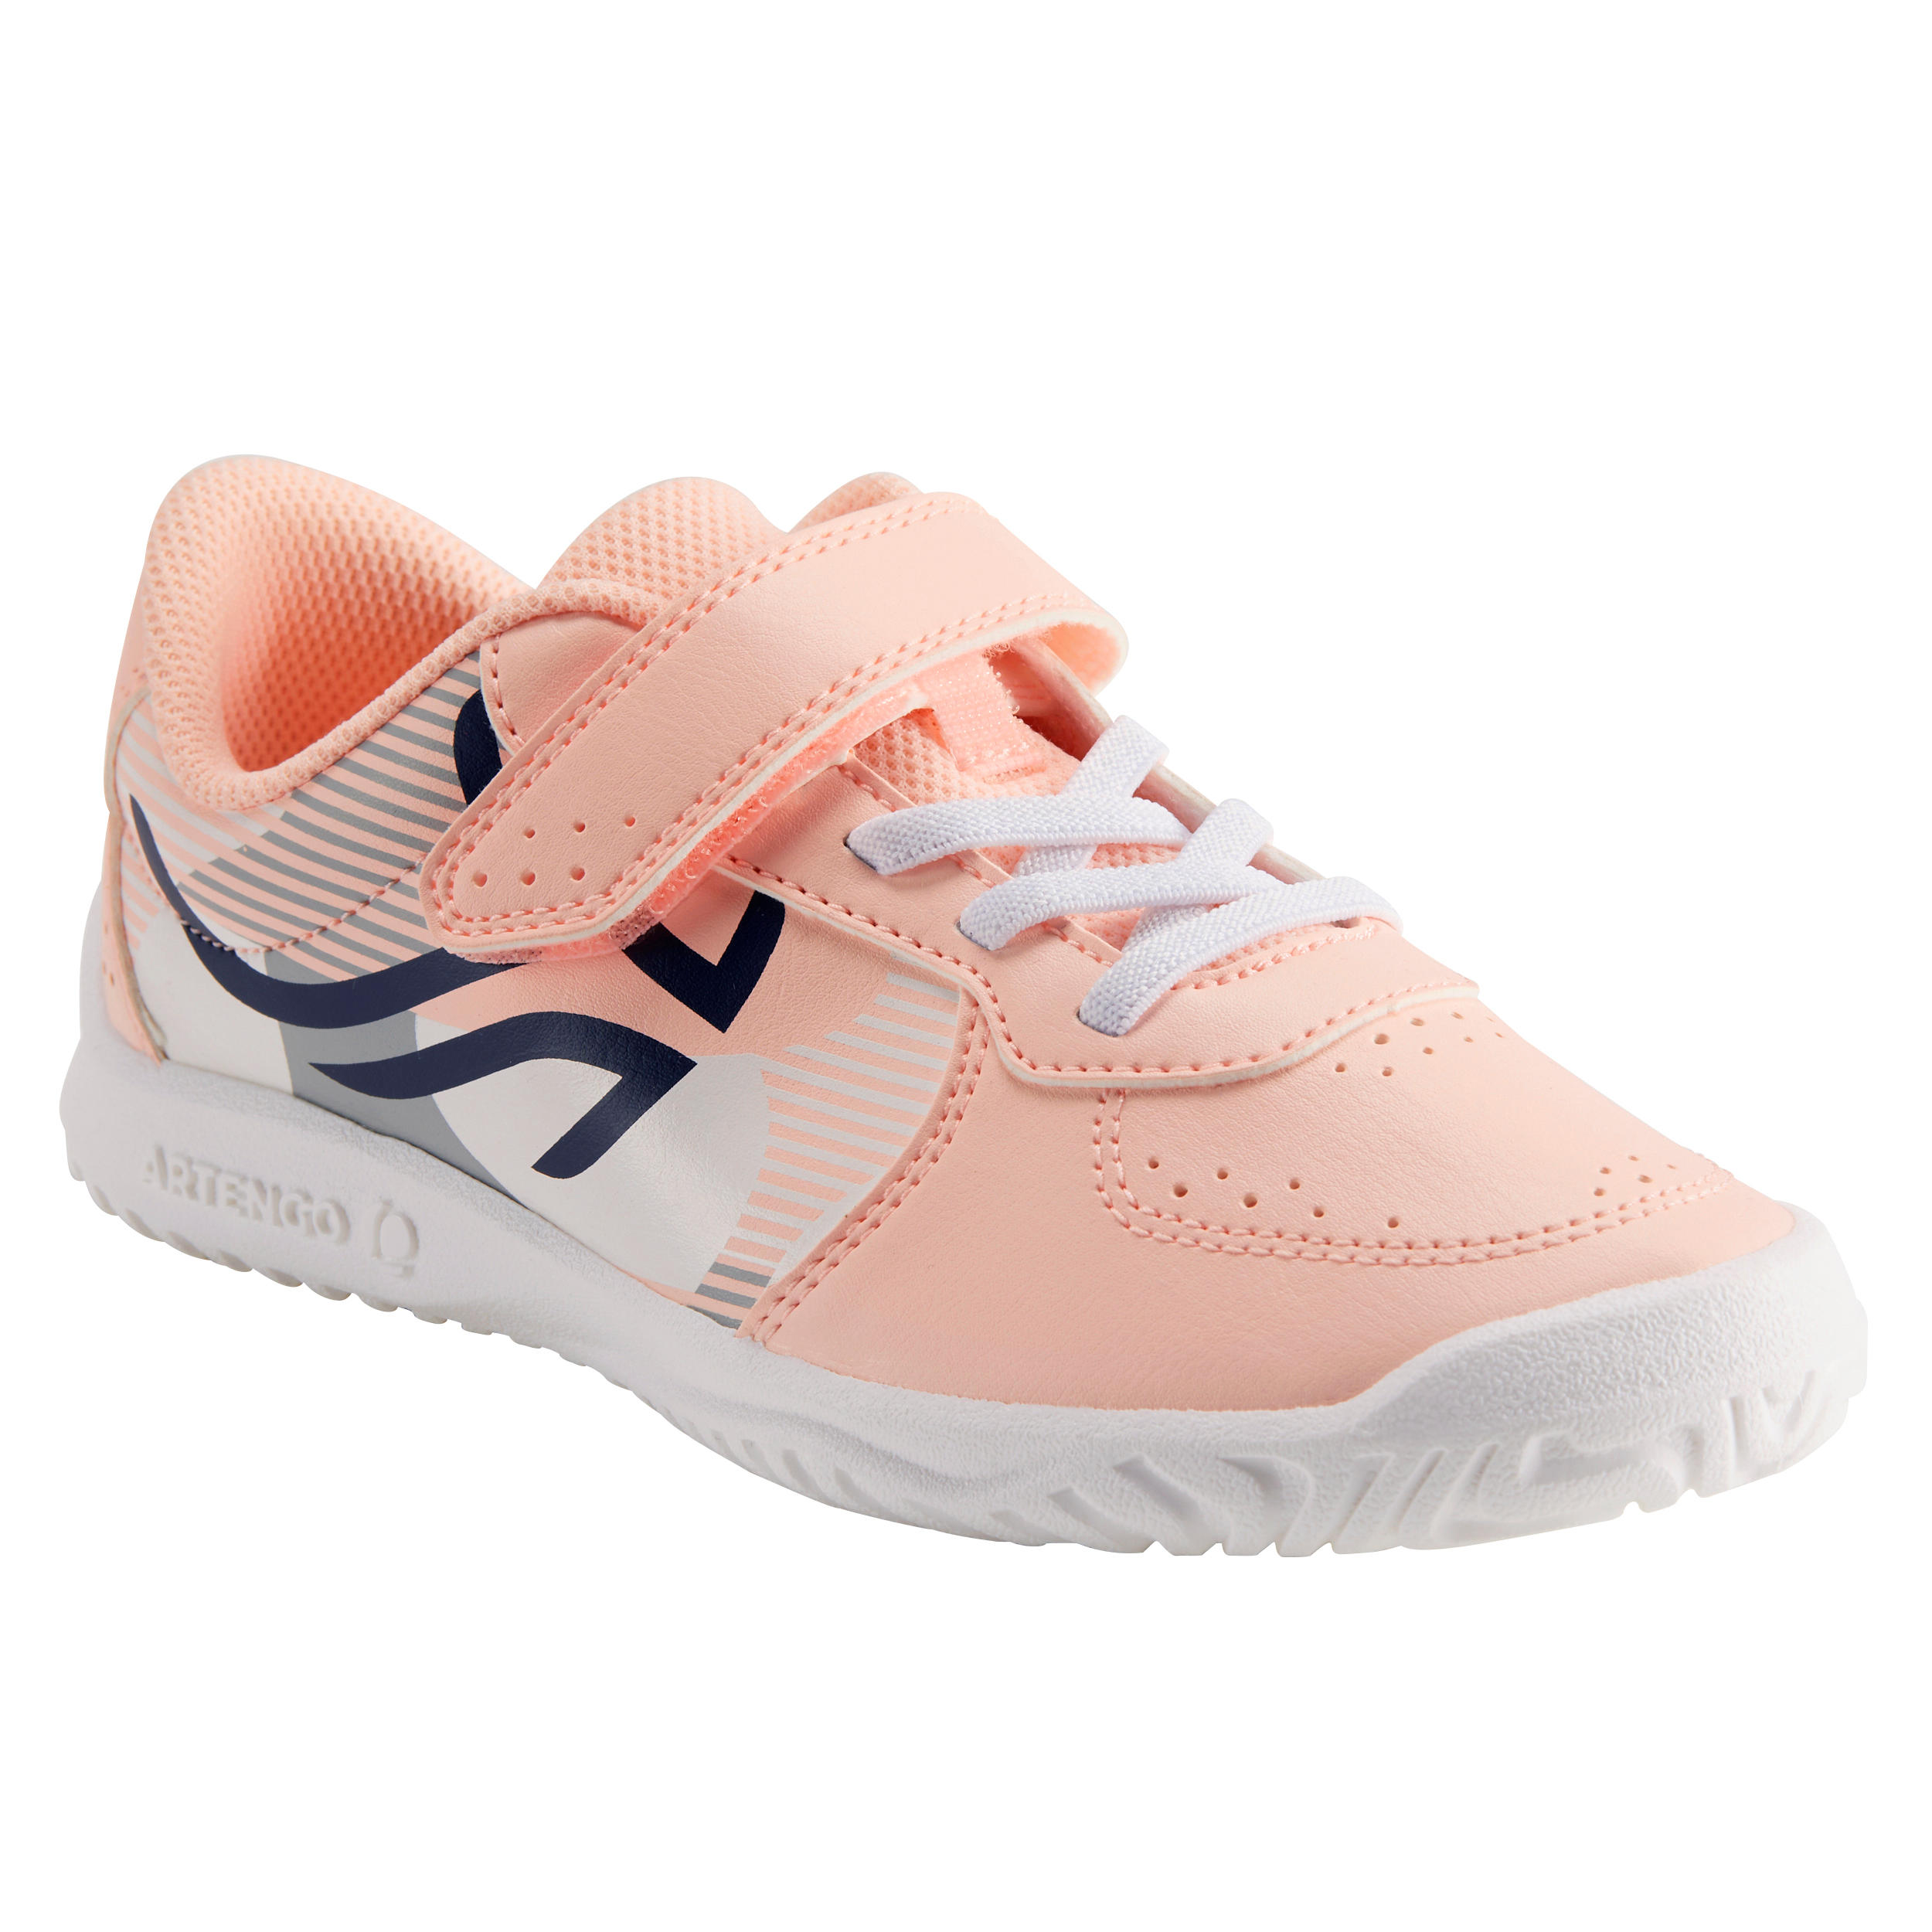 best place to buy kids tennis shoes